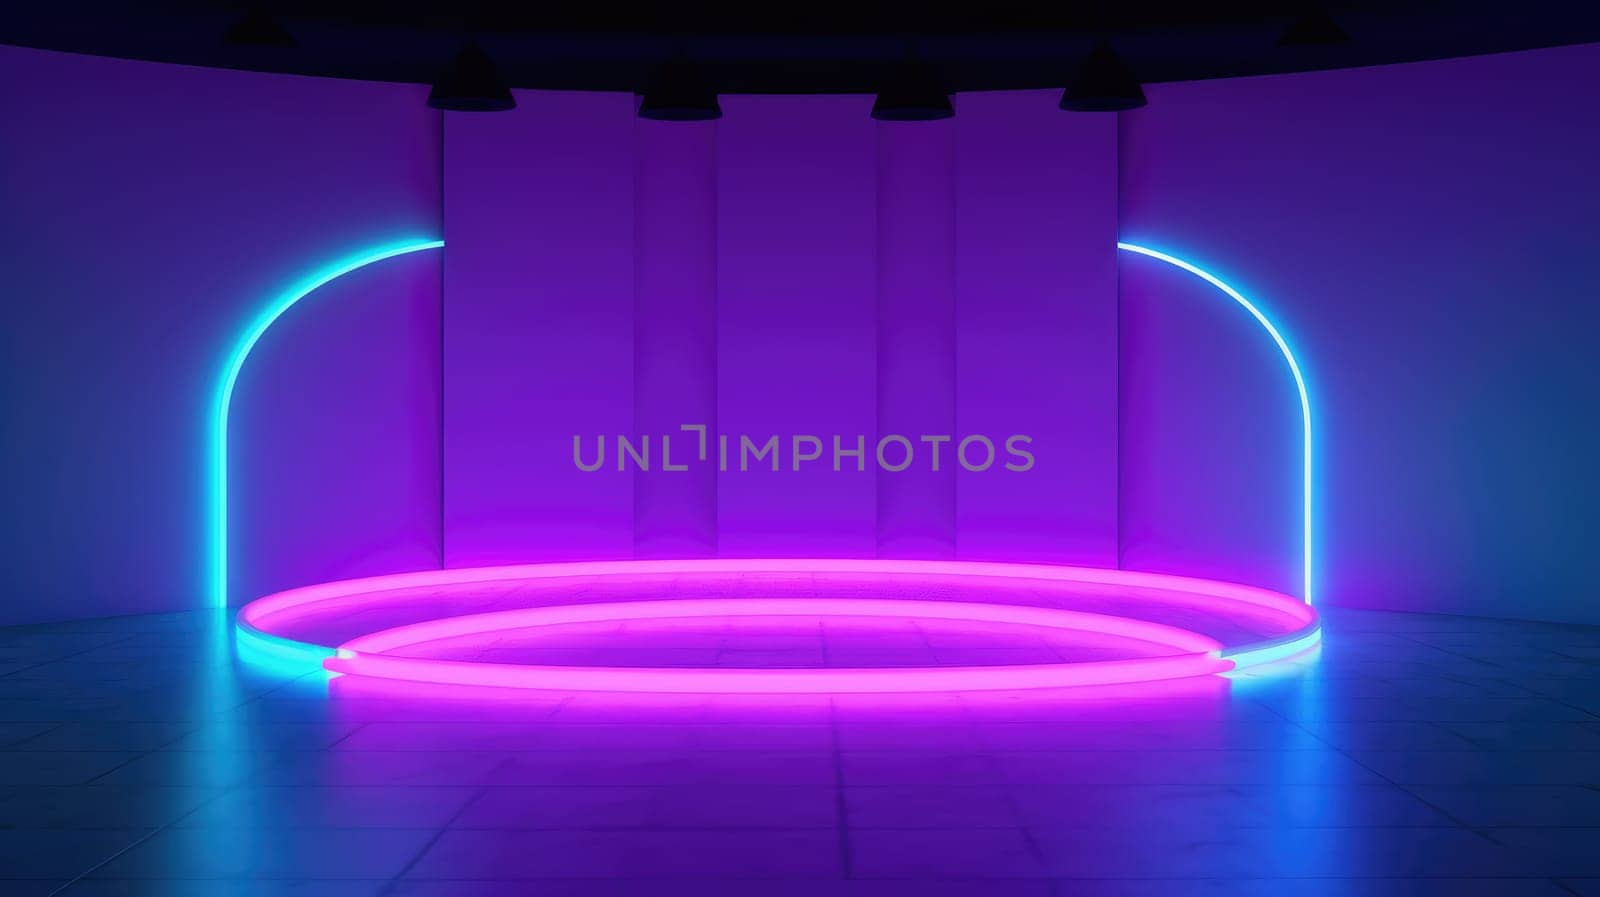 Pedestal and ultraviolet lighting. Beautiful background for your product